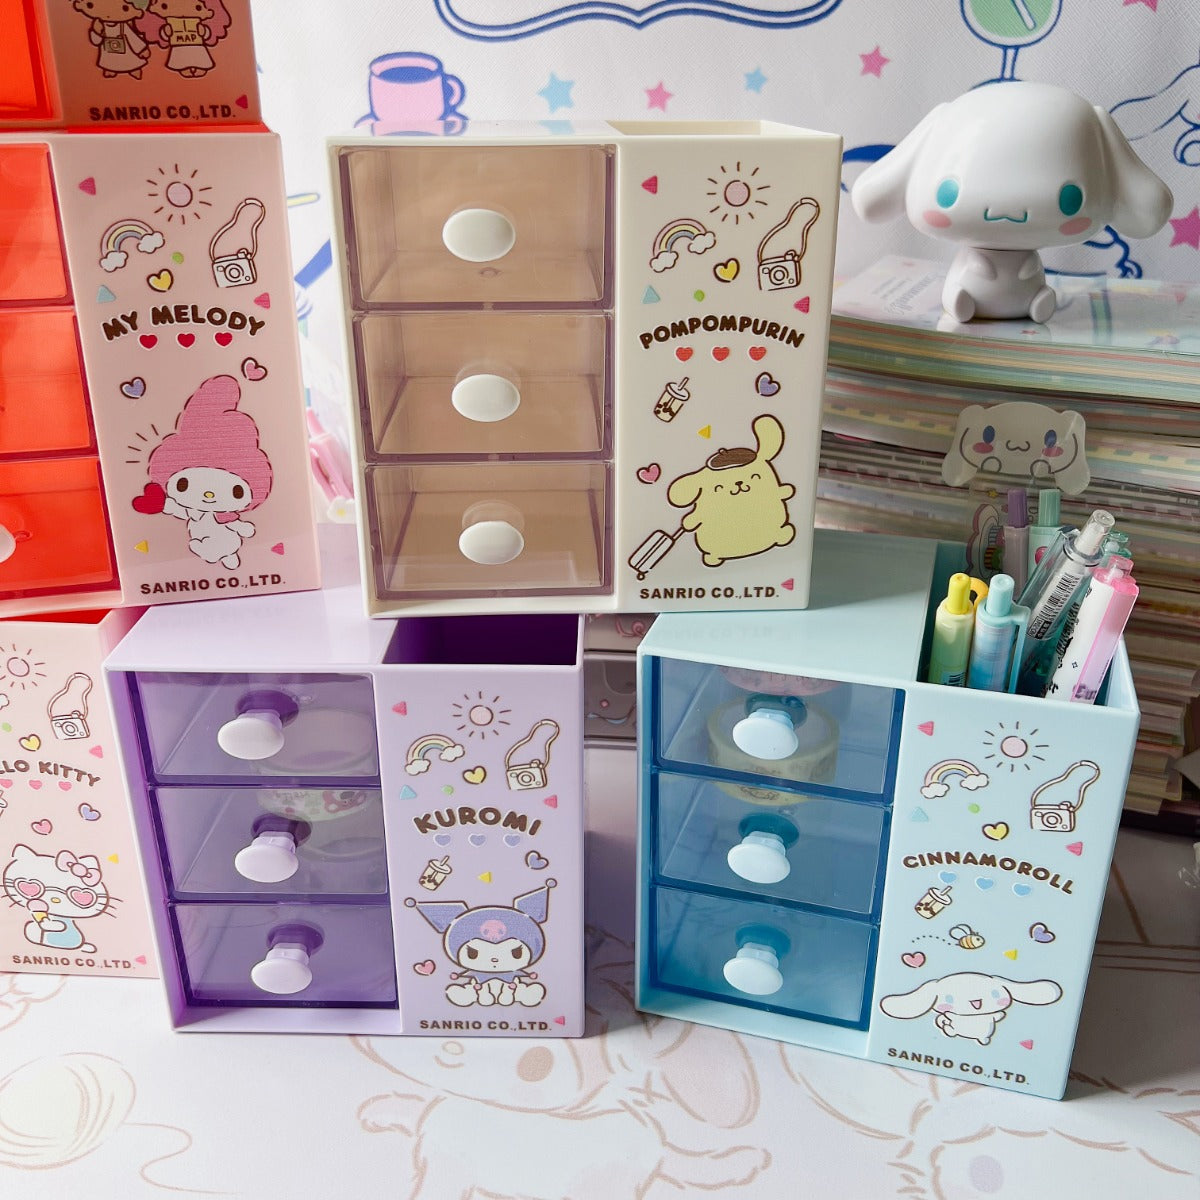 Kuromi My Melody Little Twin Stars Cinnamoroll Pompom Purin Desktop 3-Drawer Organizer Storage & Pen / Stationery Holder A Cute Shop - Inspired by You For The Cute Soul 